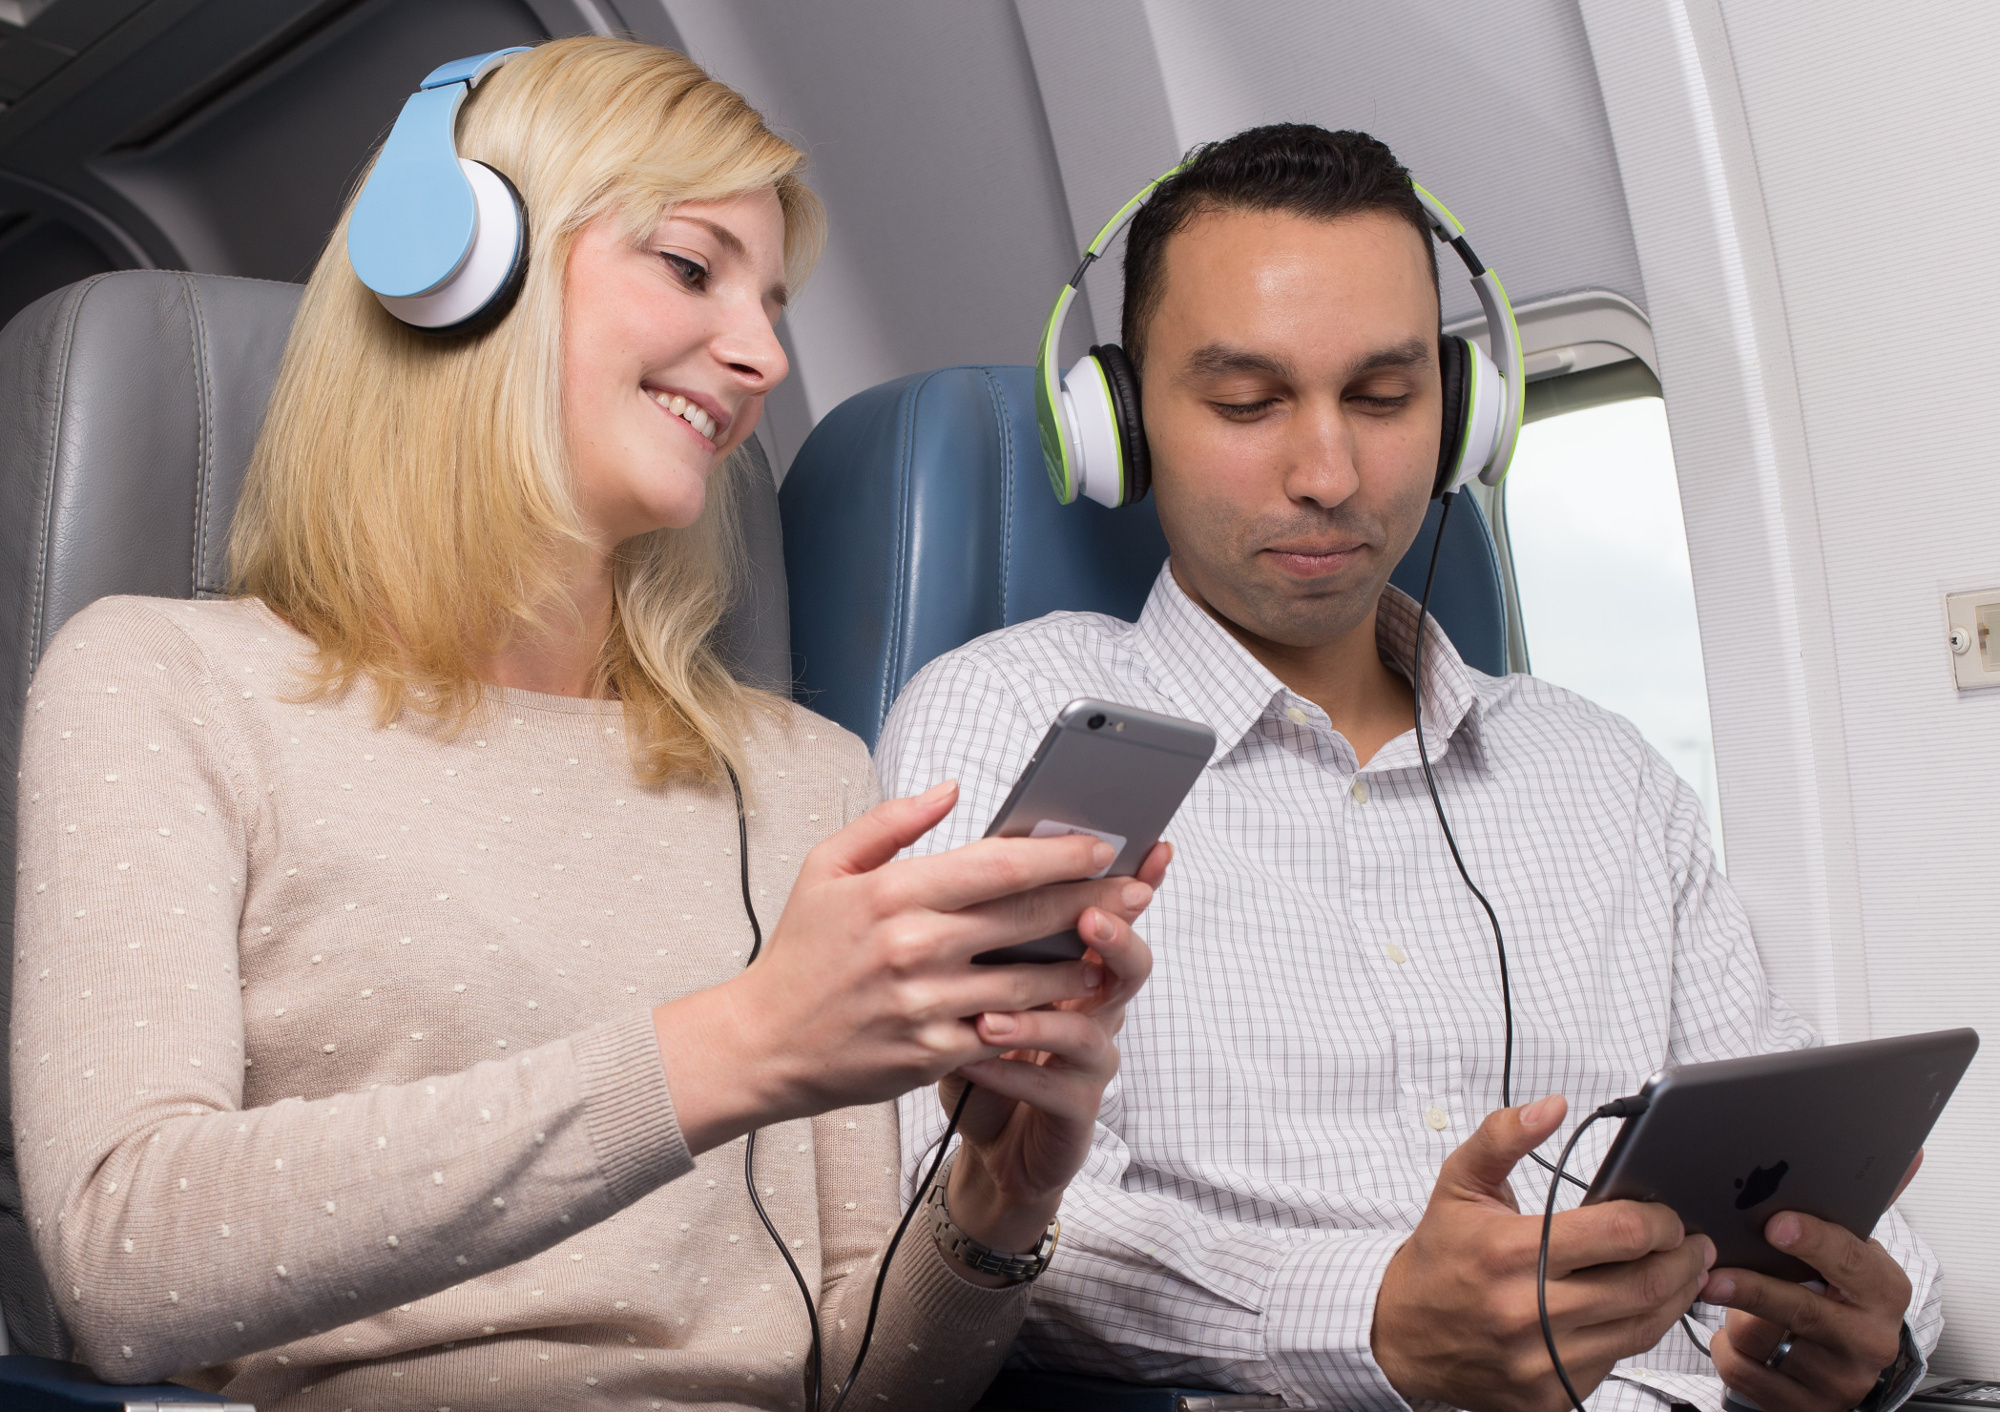 Lufthansa Systems Enlists Portworx to Help Deliver Award-Winning BoardConnect In-Flight Connectivity and Entertainment